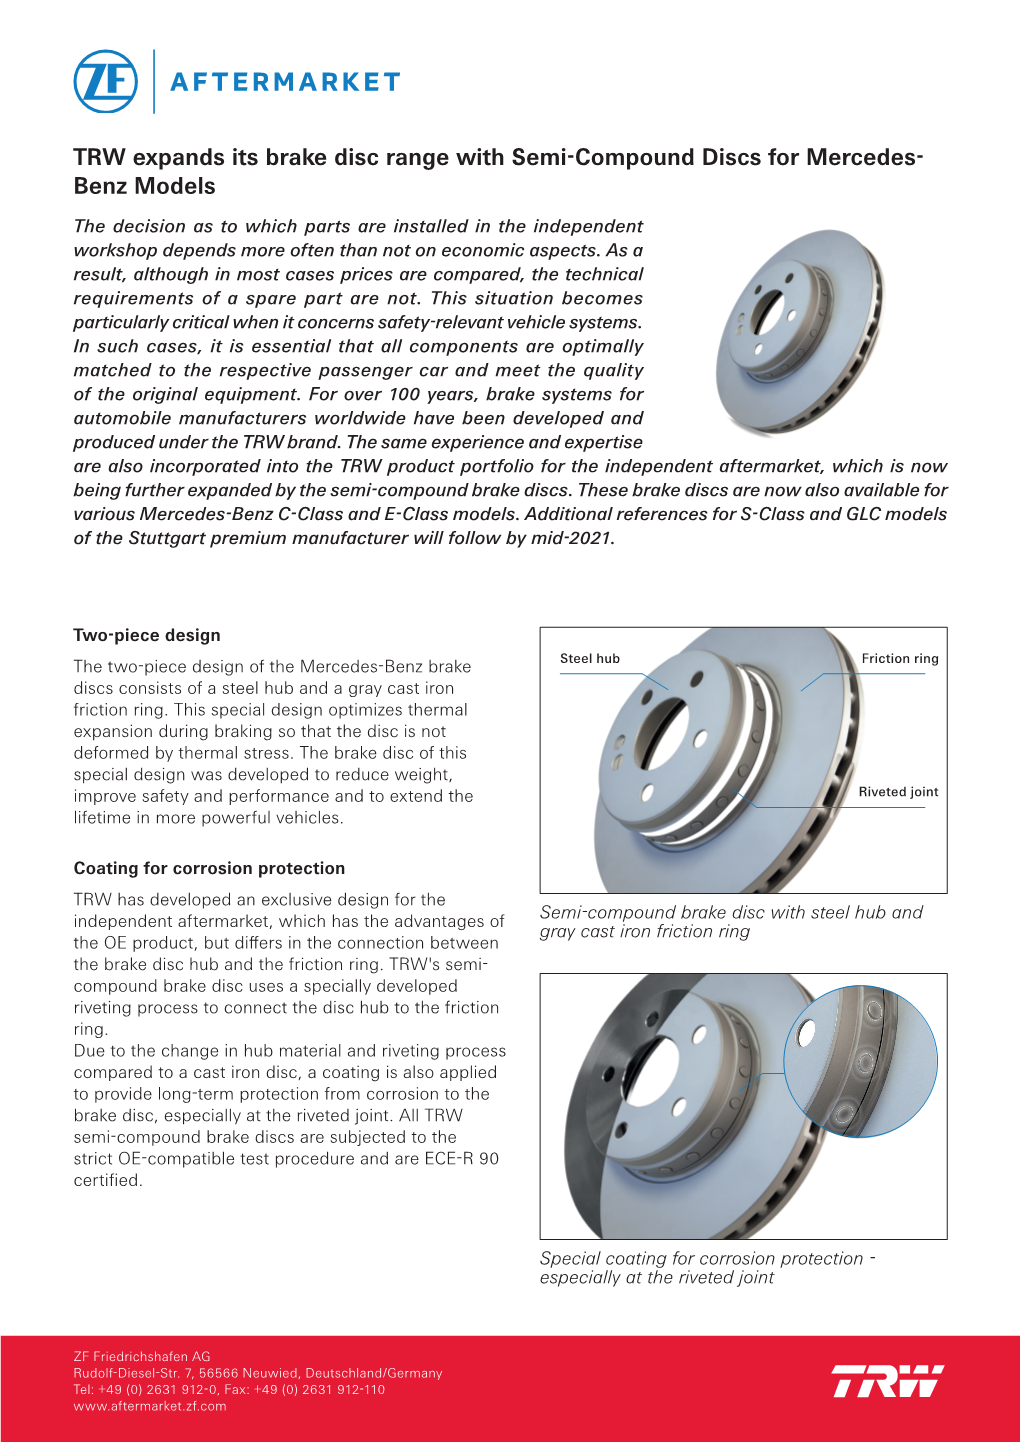 TRW Expands Its Brake Disc Range with Semi